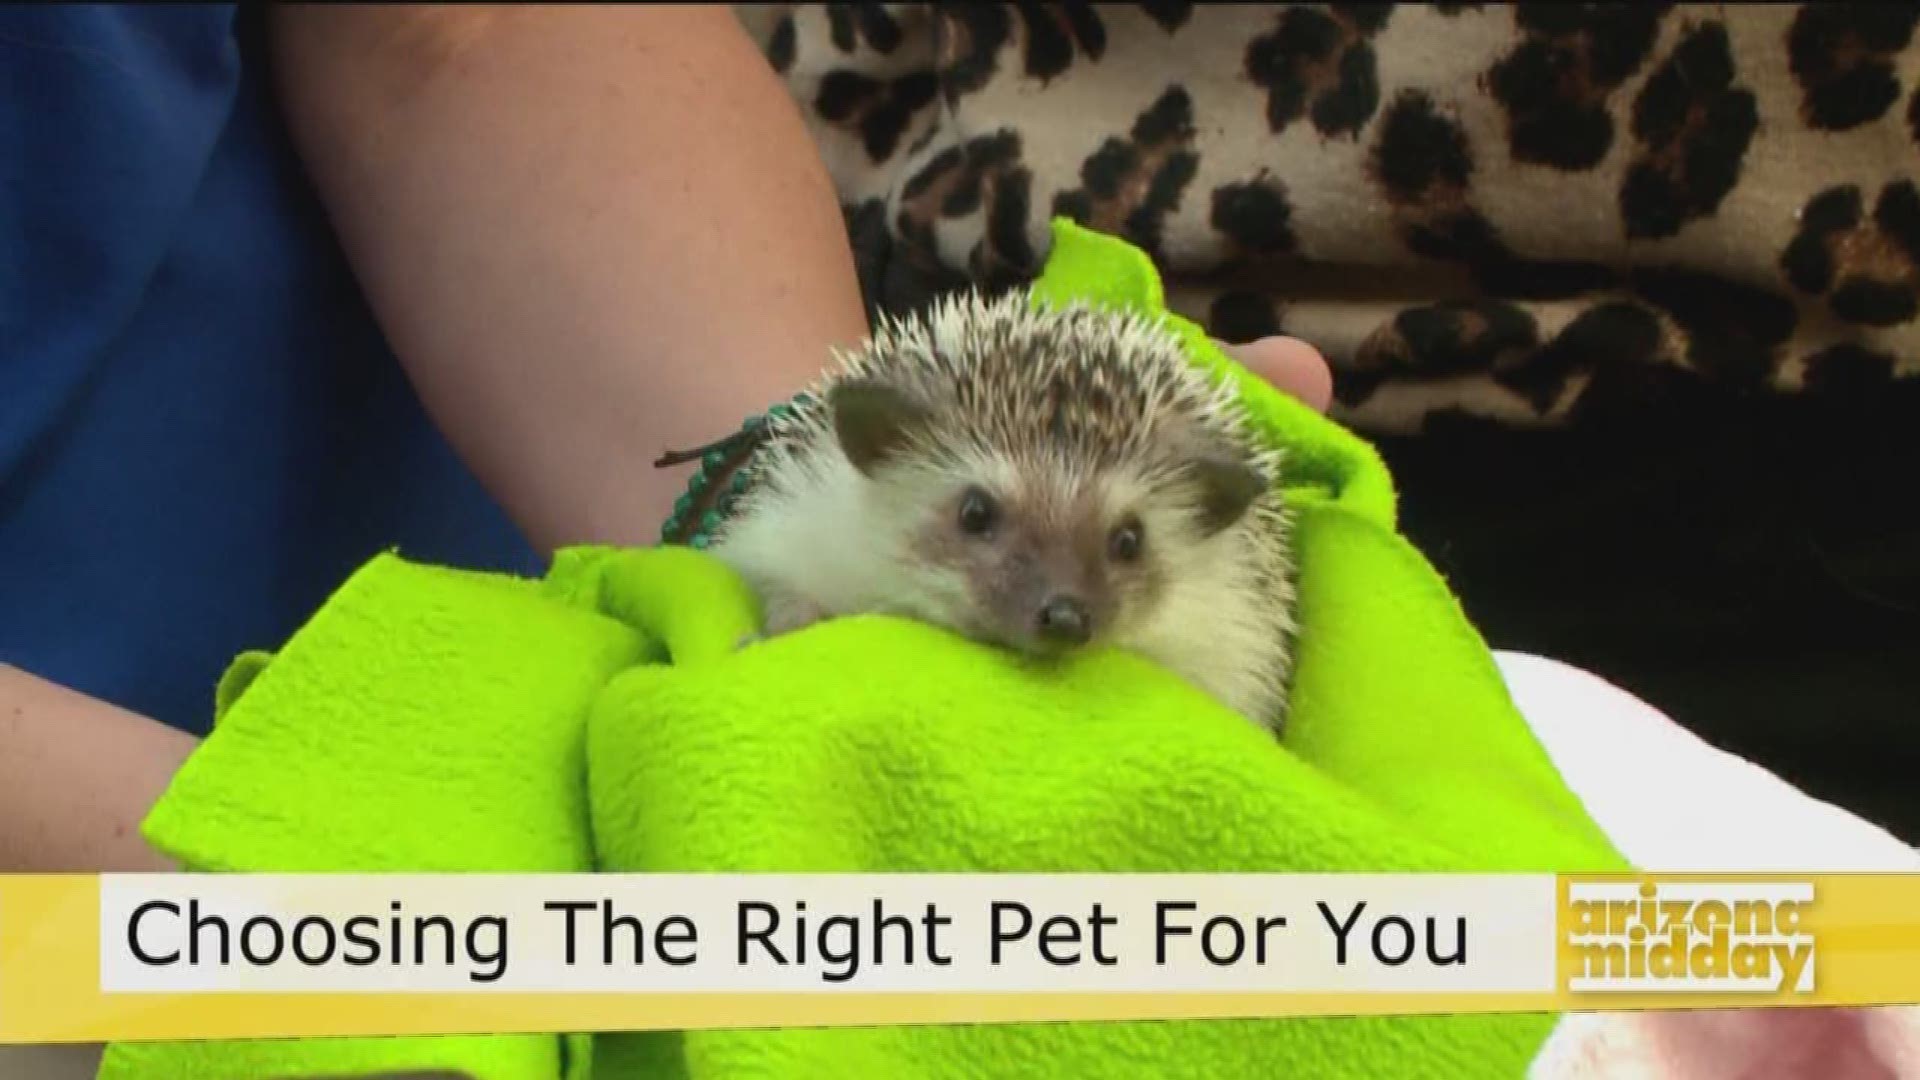 The Arizona Animal Welfare League has your guide to choosing your ideal pet.